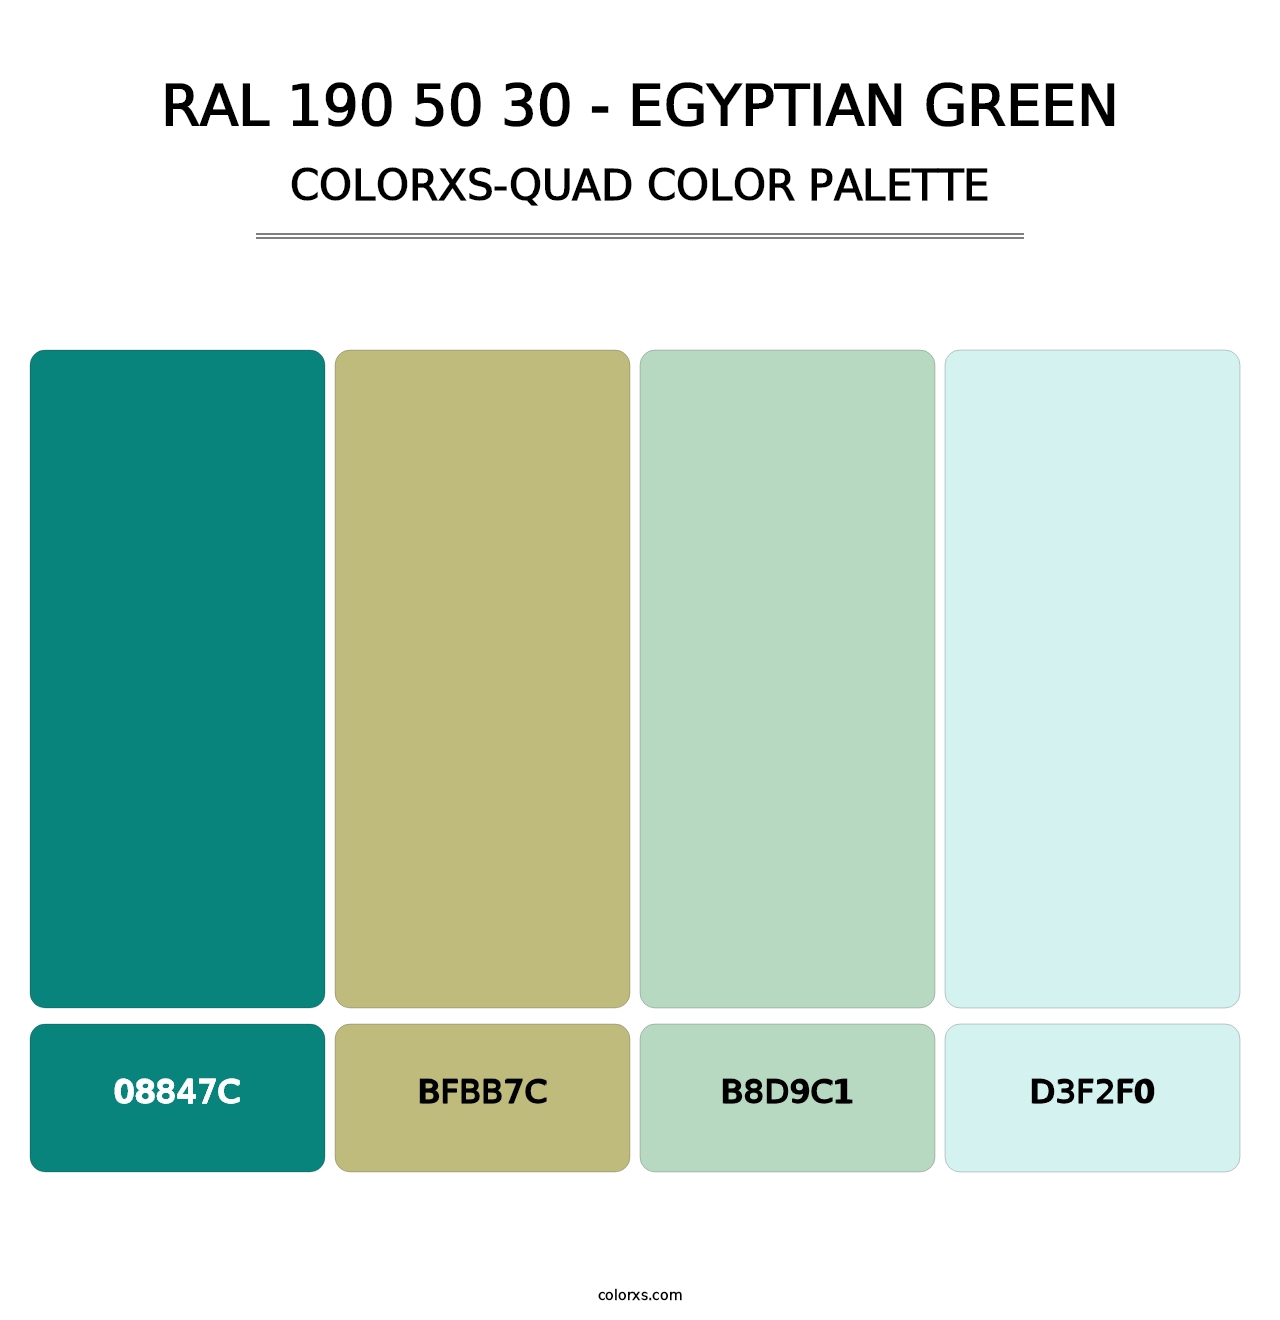 RAL 190 50 30 - Egyptian Green - Colorxs Quad Palette